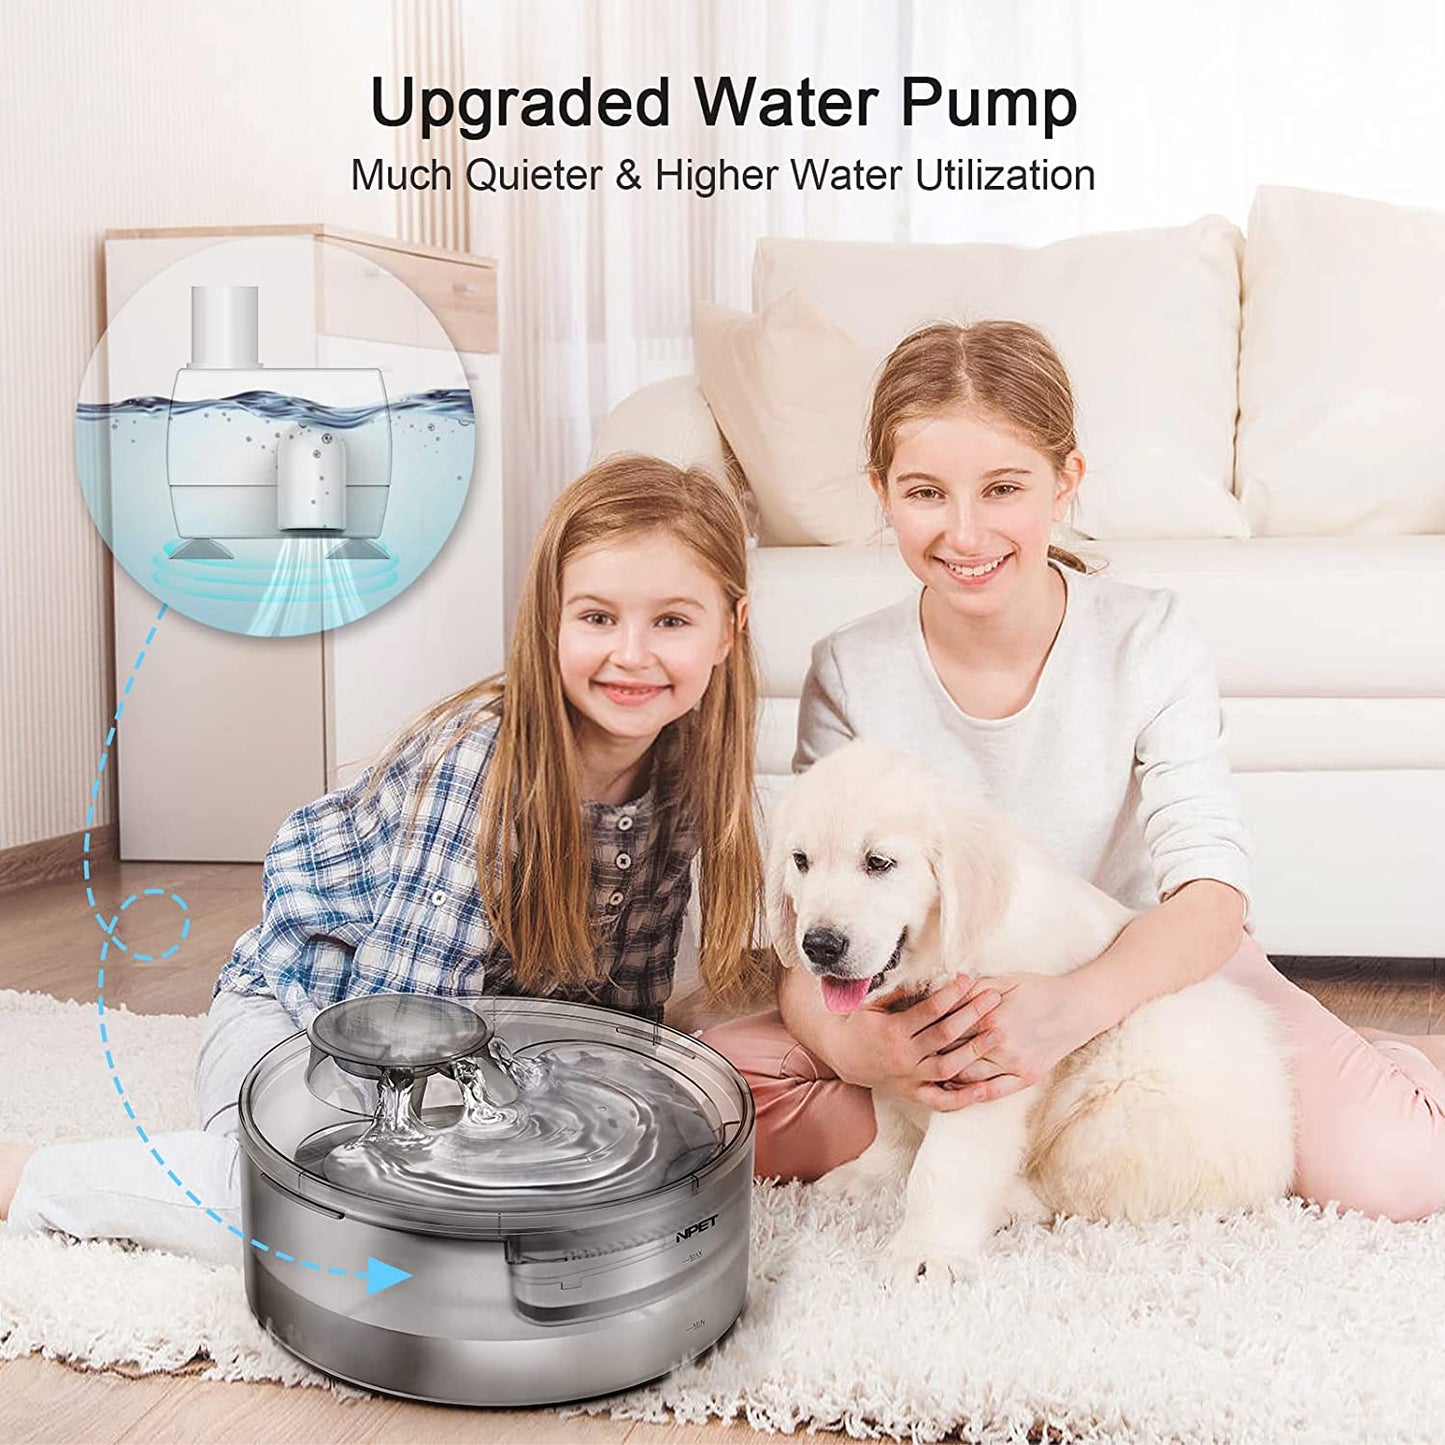 DF10 Dog Water Fountain, 170Oz/1.3Gallon/5L Large Automatic Pet Water Dispenser Dog Water Bowl with Cleaning Kit, Replacement Filter for Cat, Dogs, Multiple Pets